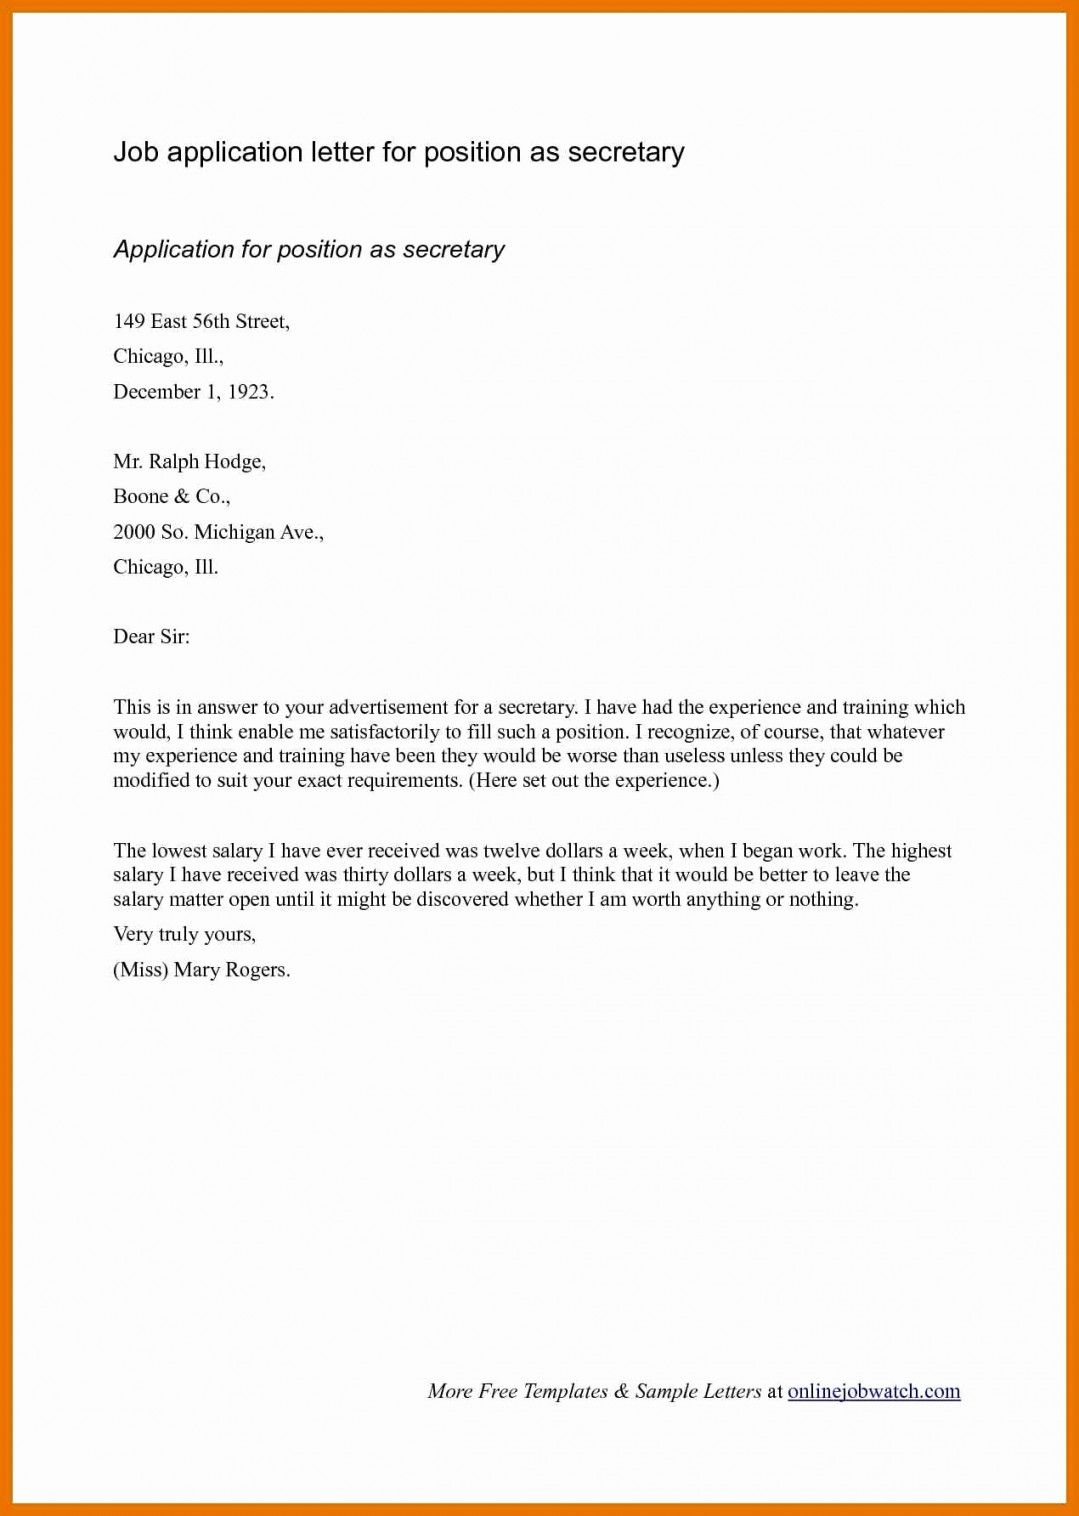 25 Cover Letter Header Job Cover Letter Application with proportions 1079 X 1516